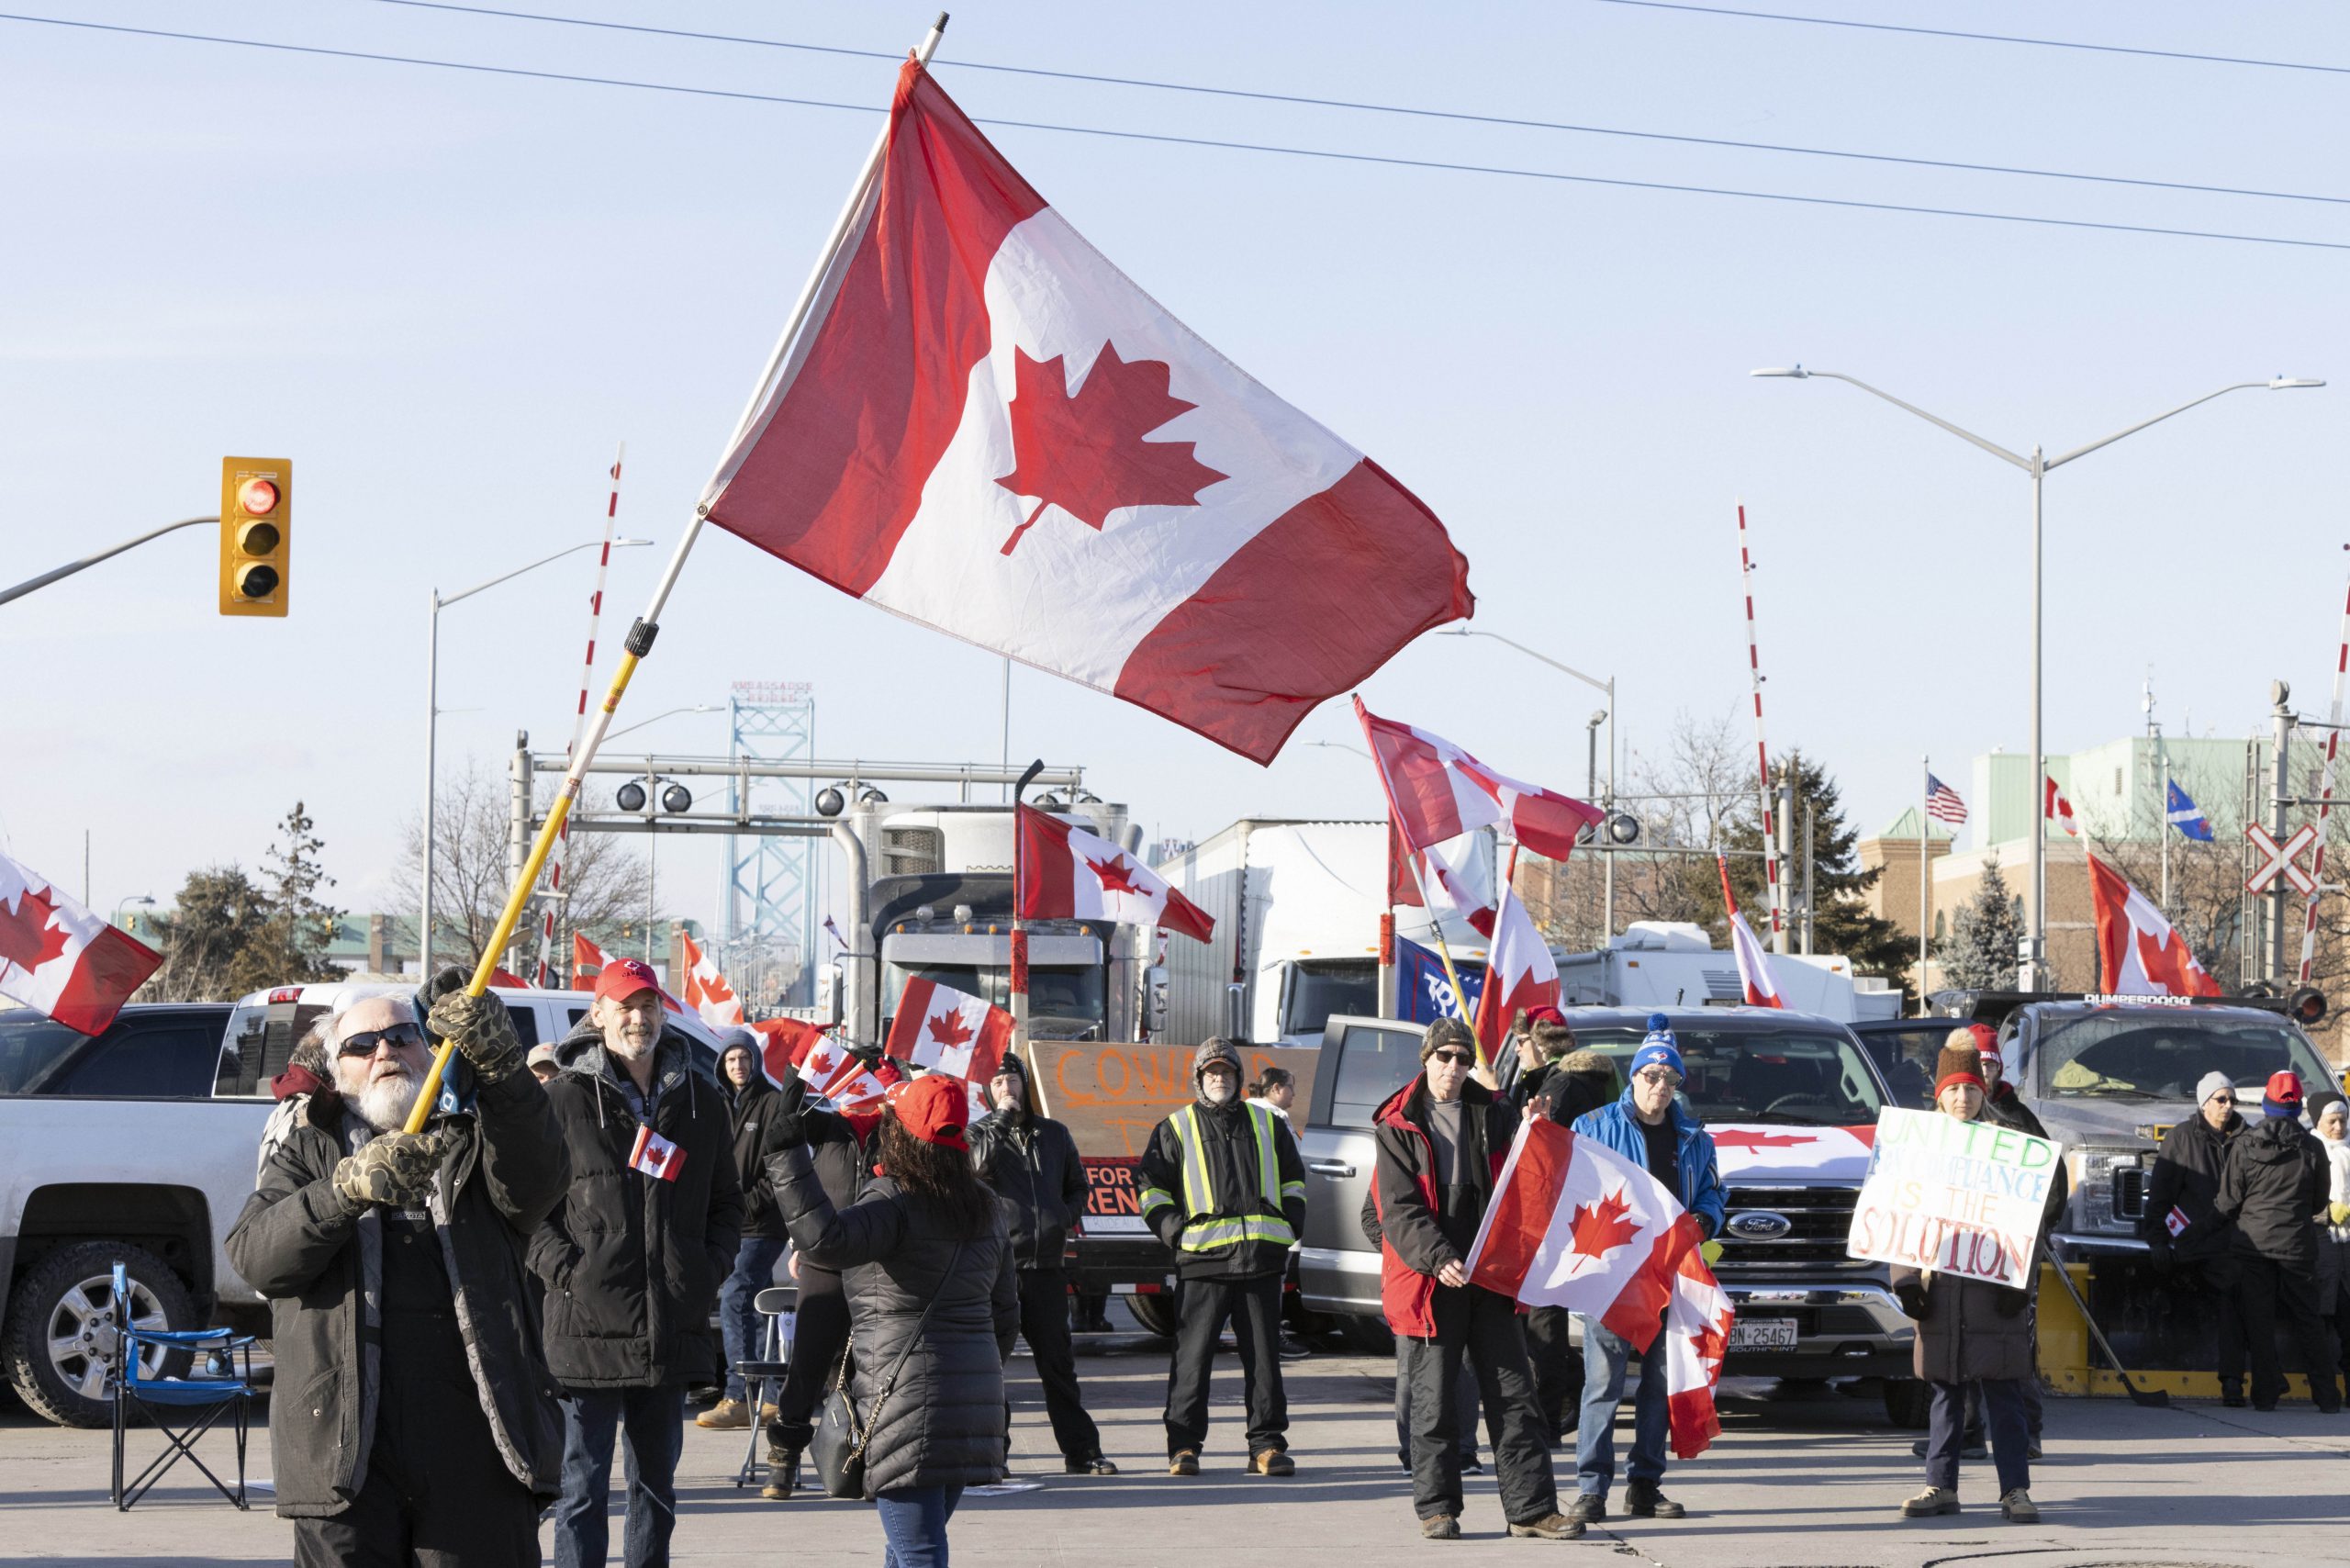 Canada’s Ontario province declares emergency over truckers’ protests